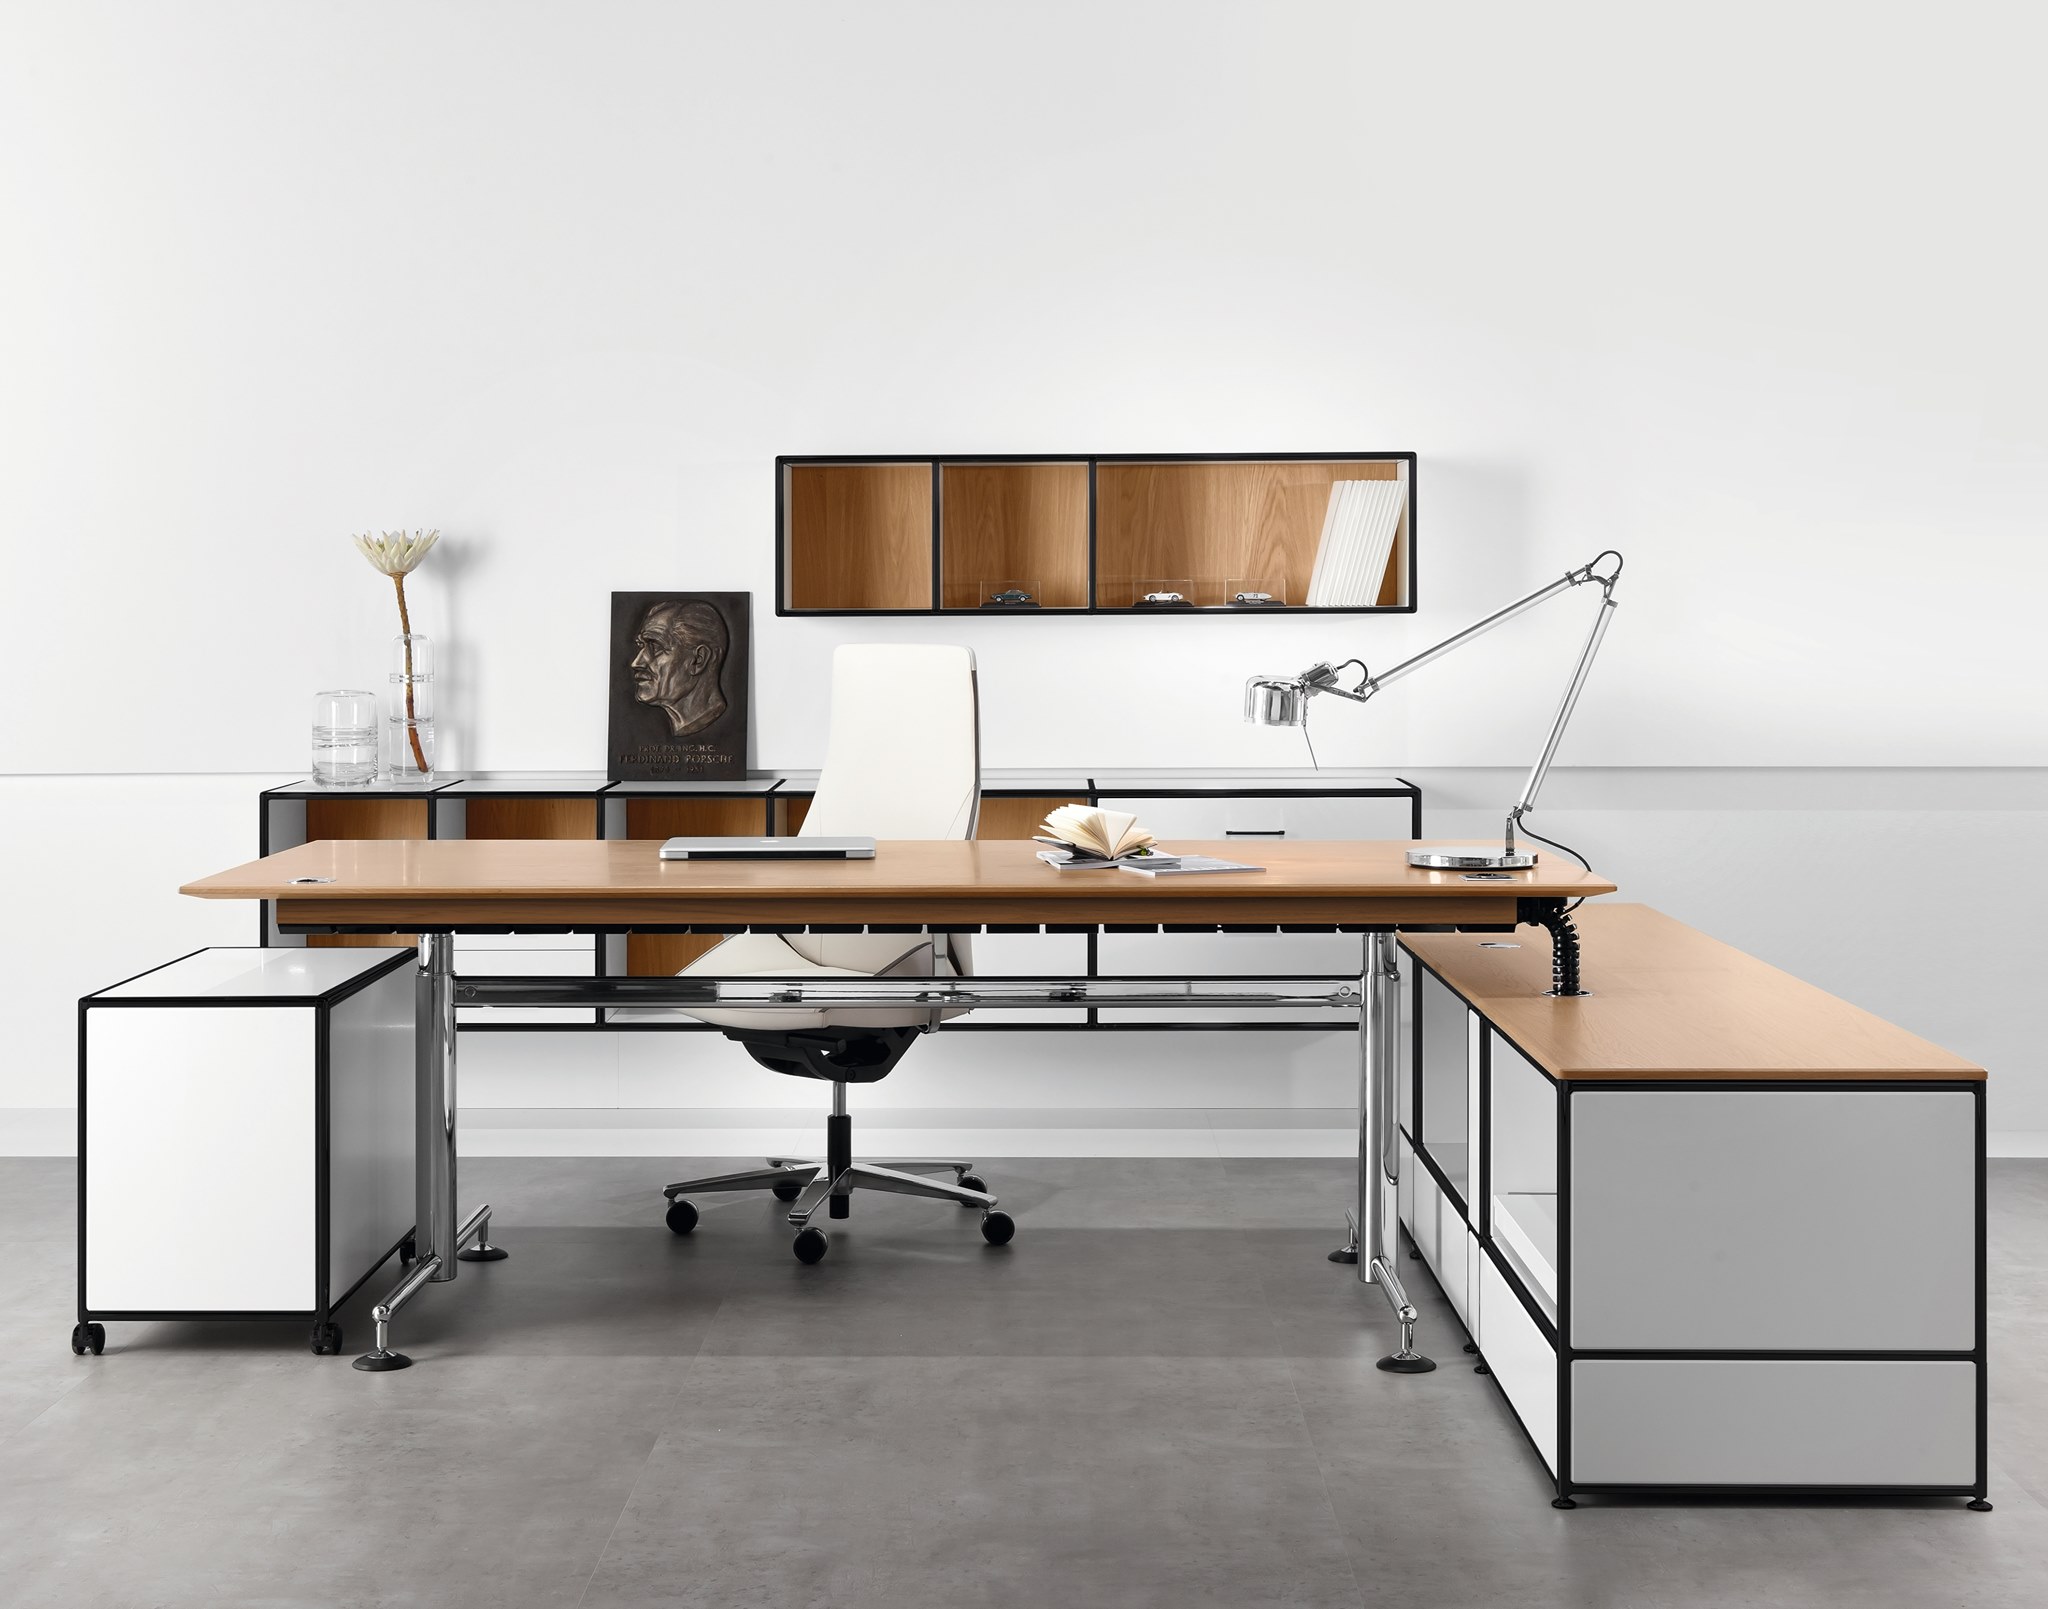 High-class office furniture for the director room of large enterprise